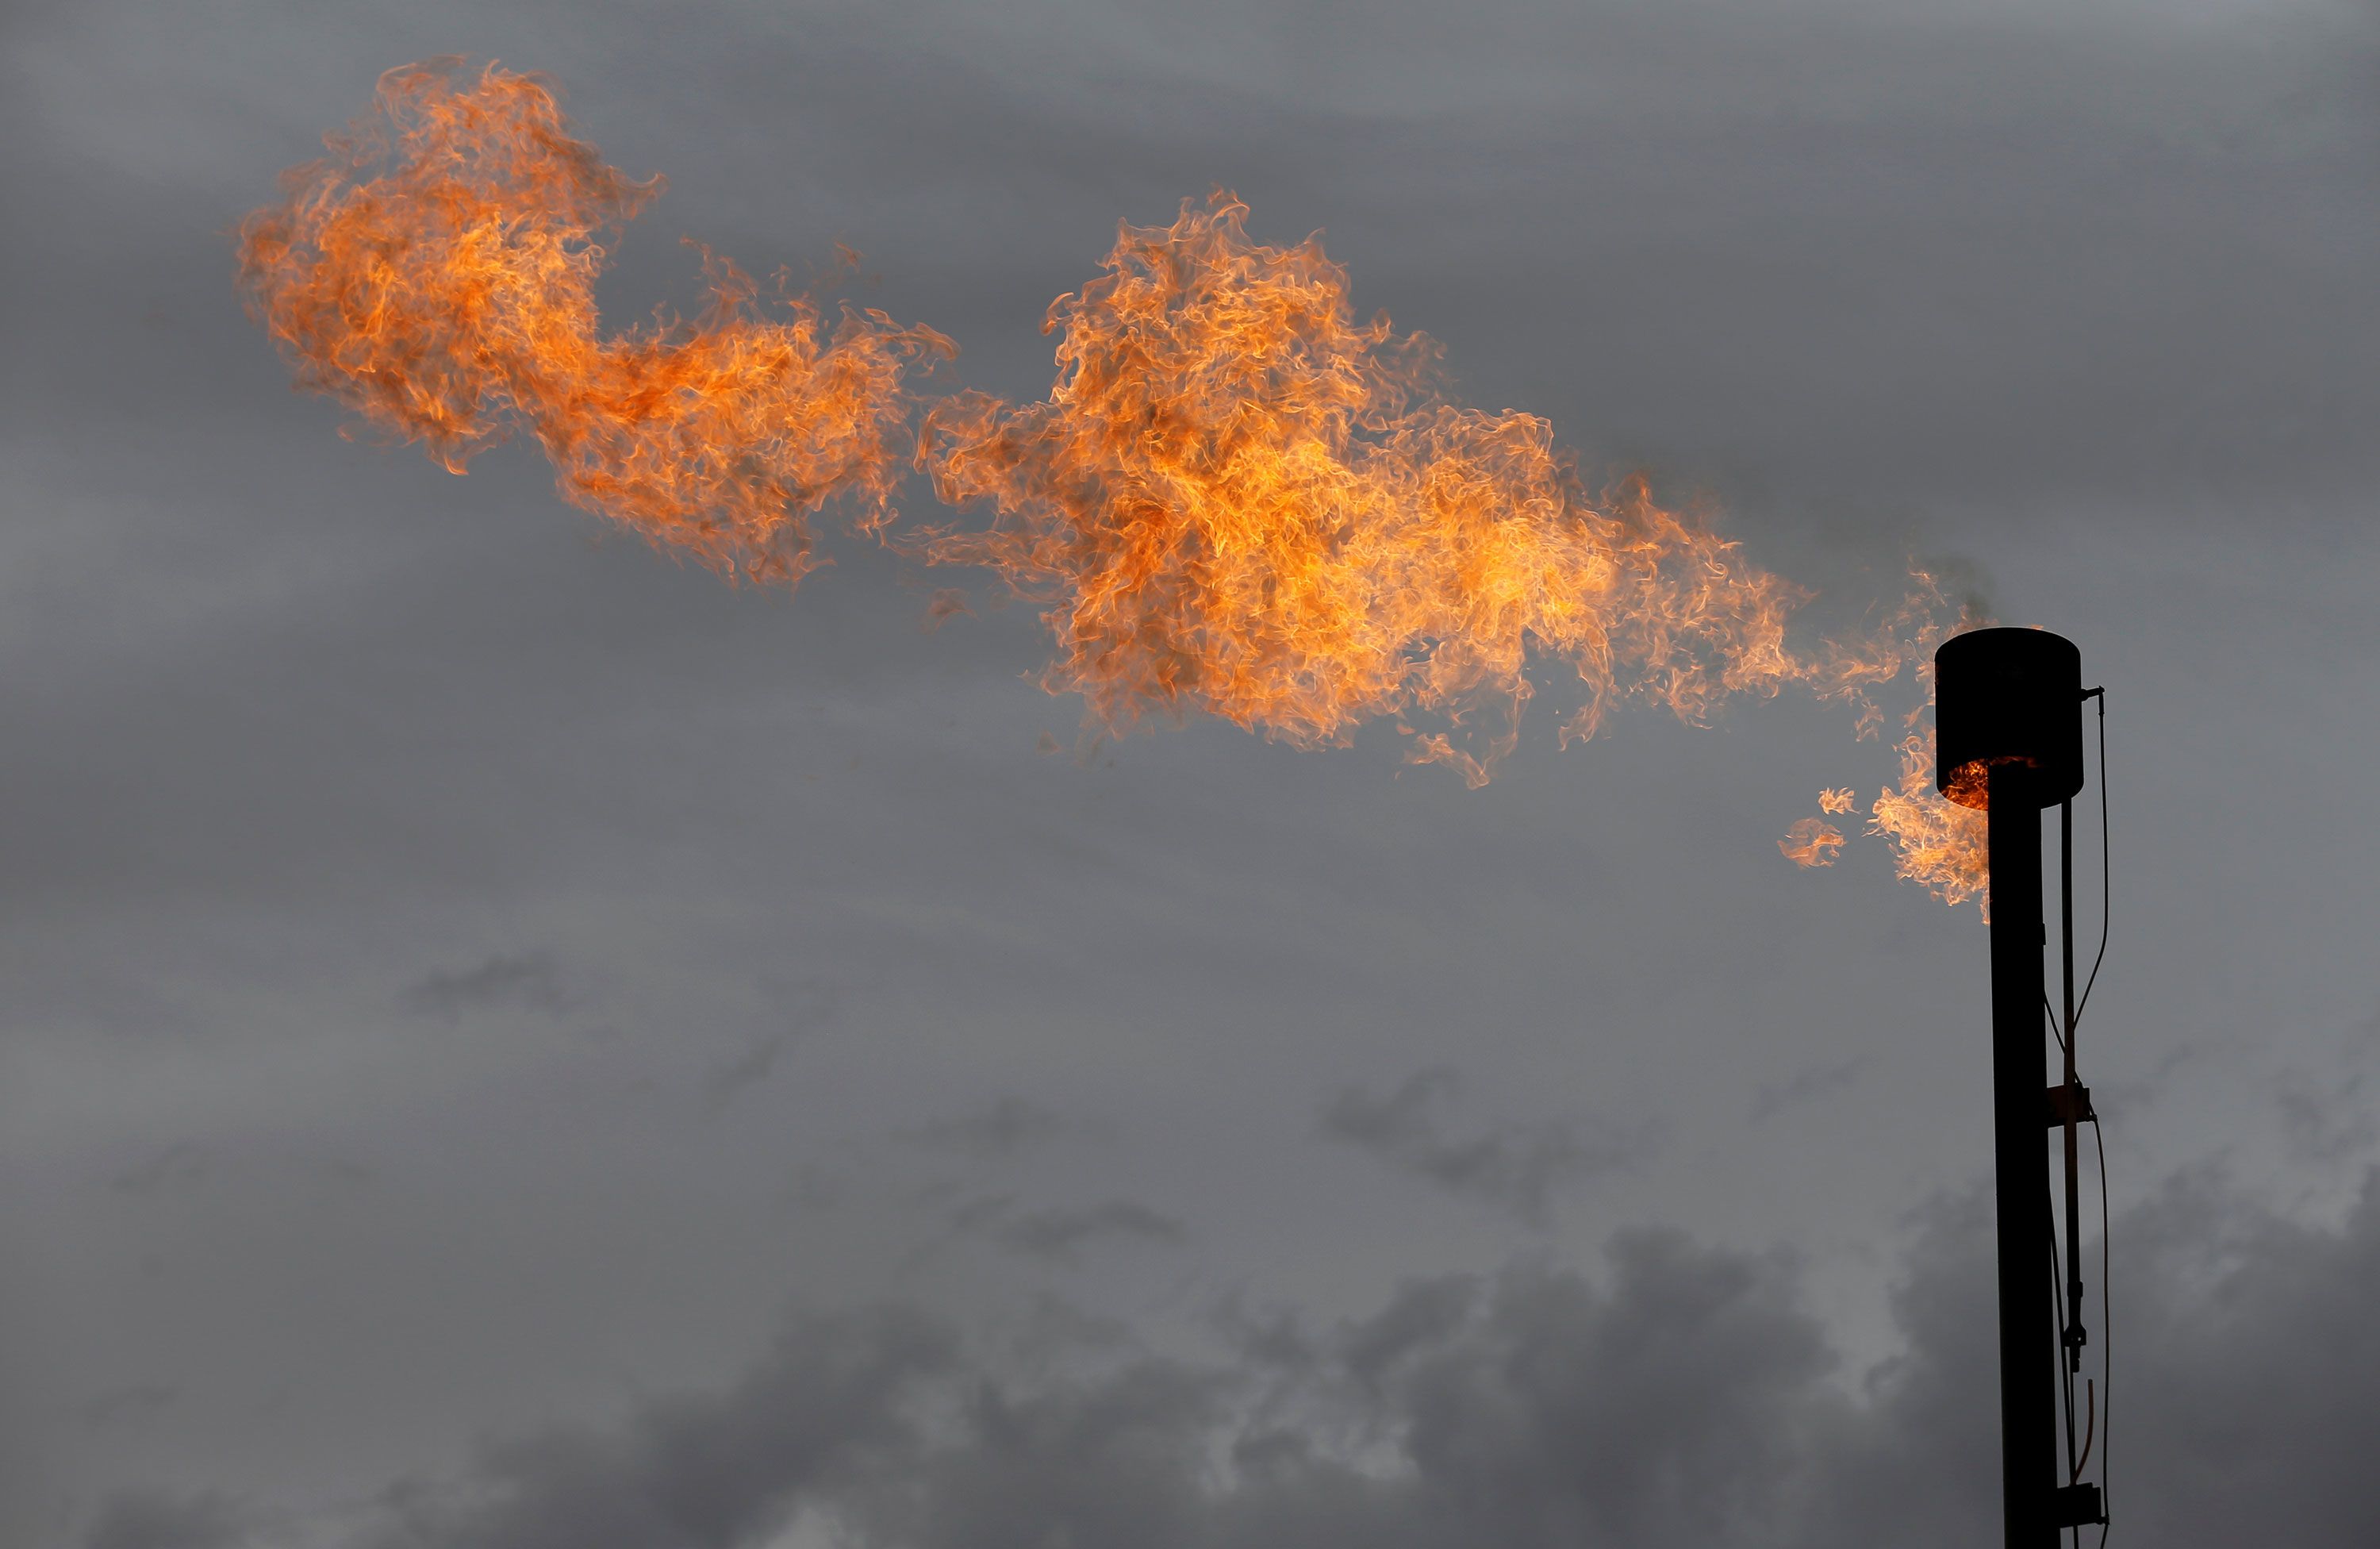 Gas flaring and venting wastes resources and heats the planet – it